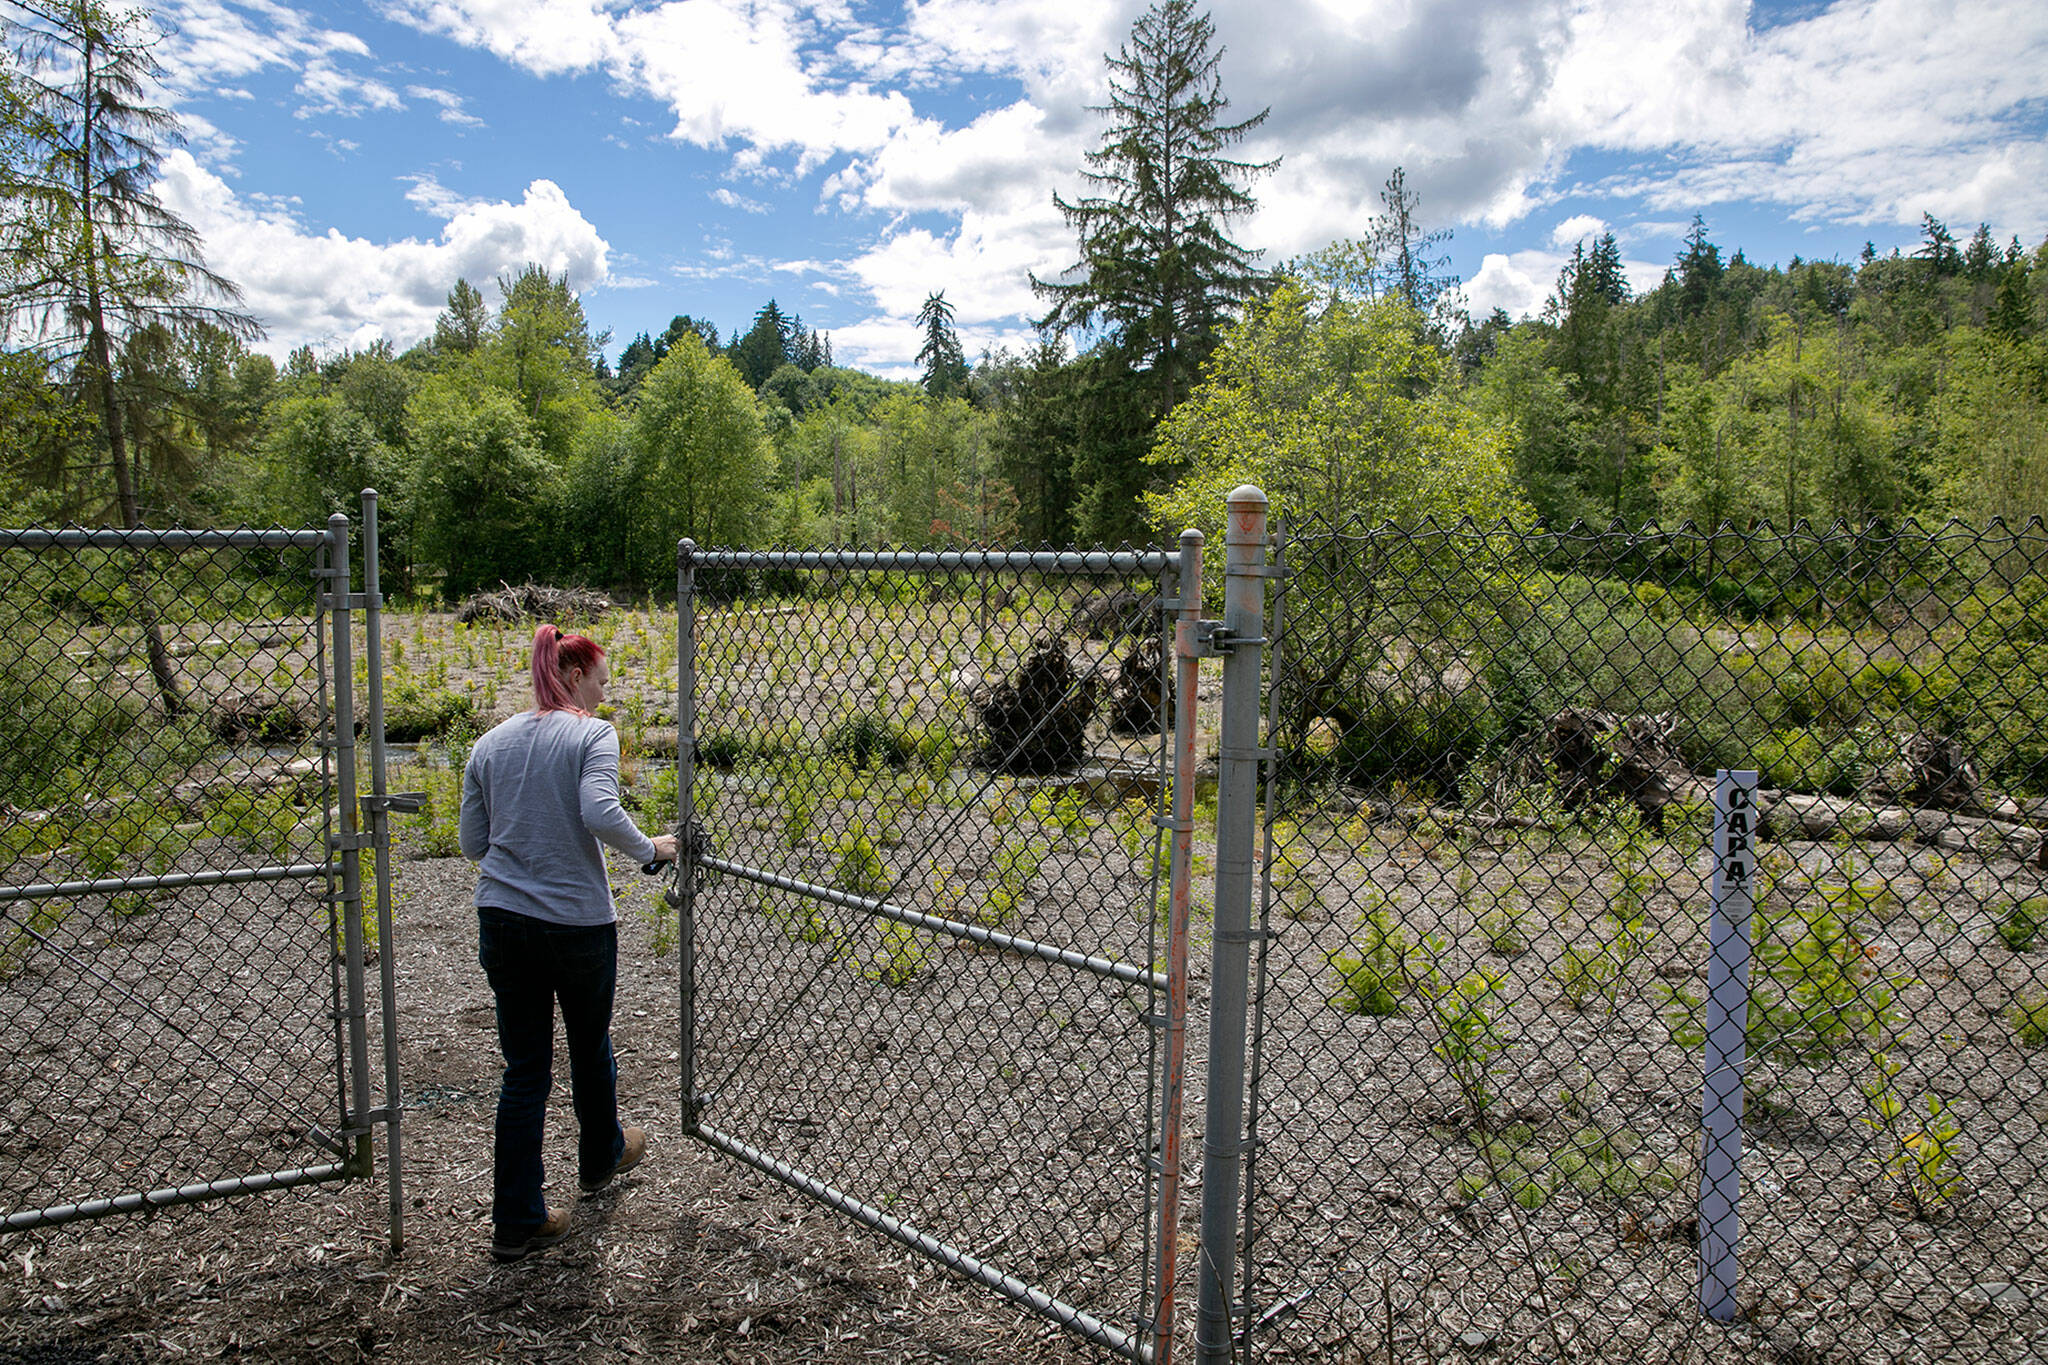 Beth Larsen, an environmental planner with Snohomish County, opens the gates at a new protected habitat area on Thursday south of Mill Creek. (Ryan Berry / The Herald)